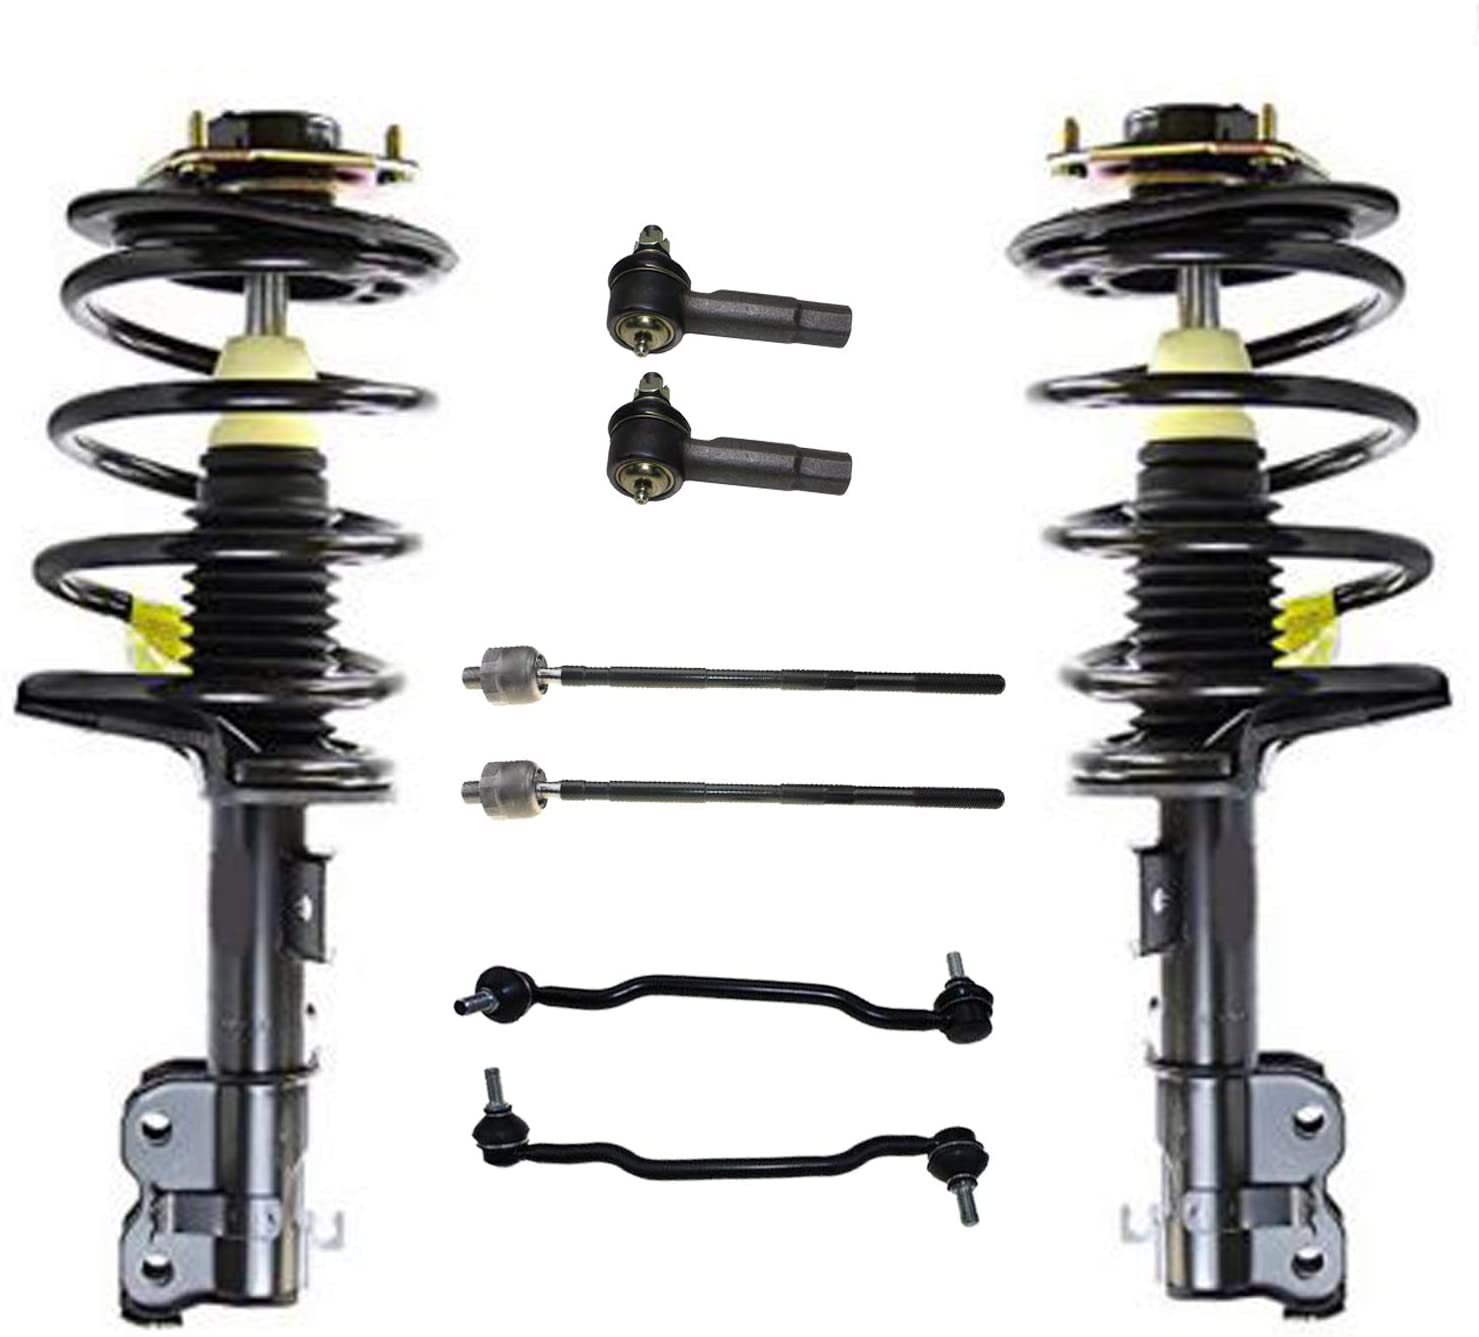 Detroit Axle Front Struts + Sway Bar Links + Inner & Outer Tie Rods Replacement for 2004-2008 Nissan Maxima - 8pc Set